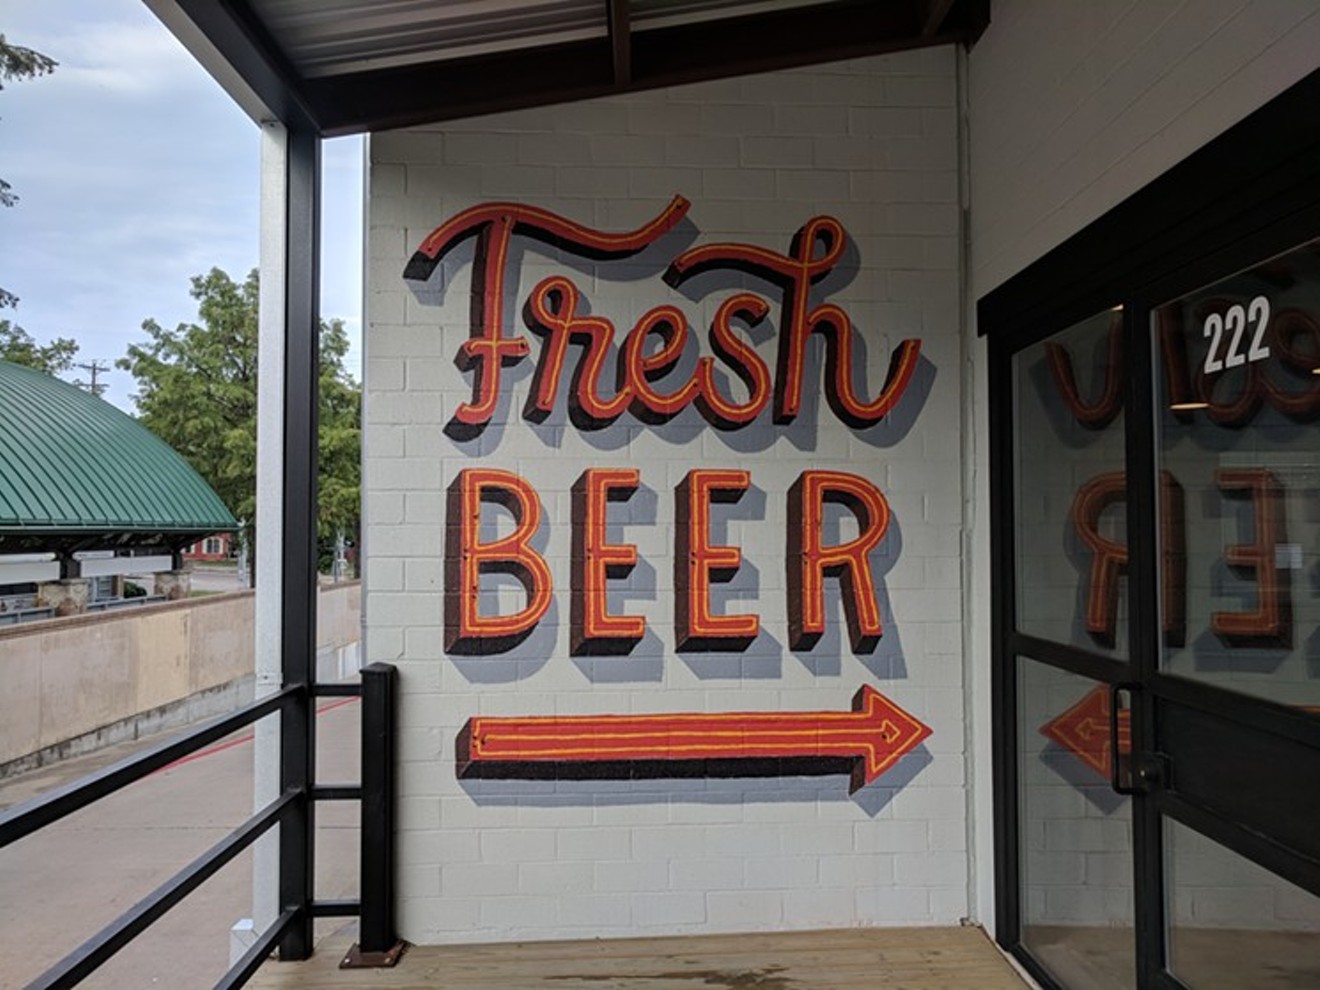 If you haven't visited Oak Cliff Brewing Co. yet, this is a stellar opportunity.